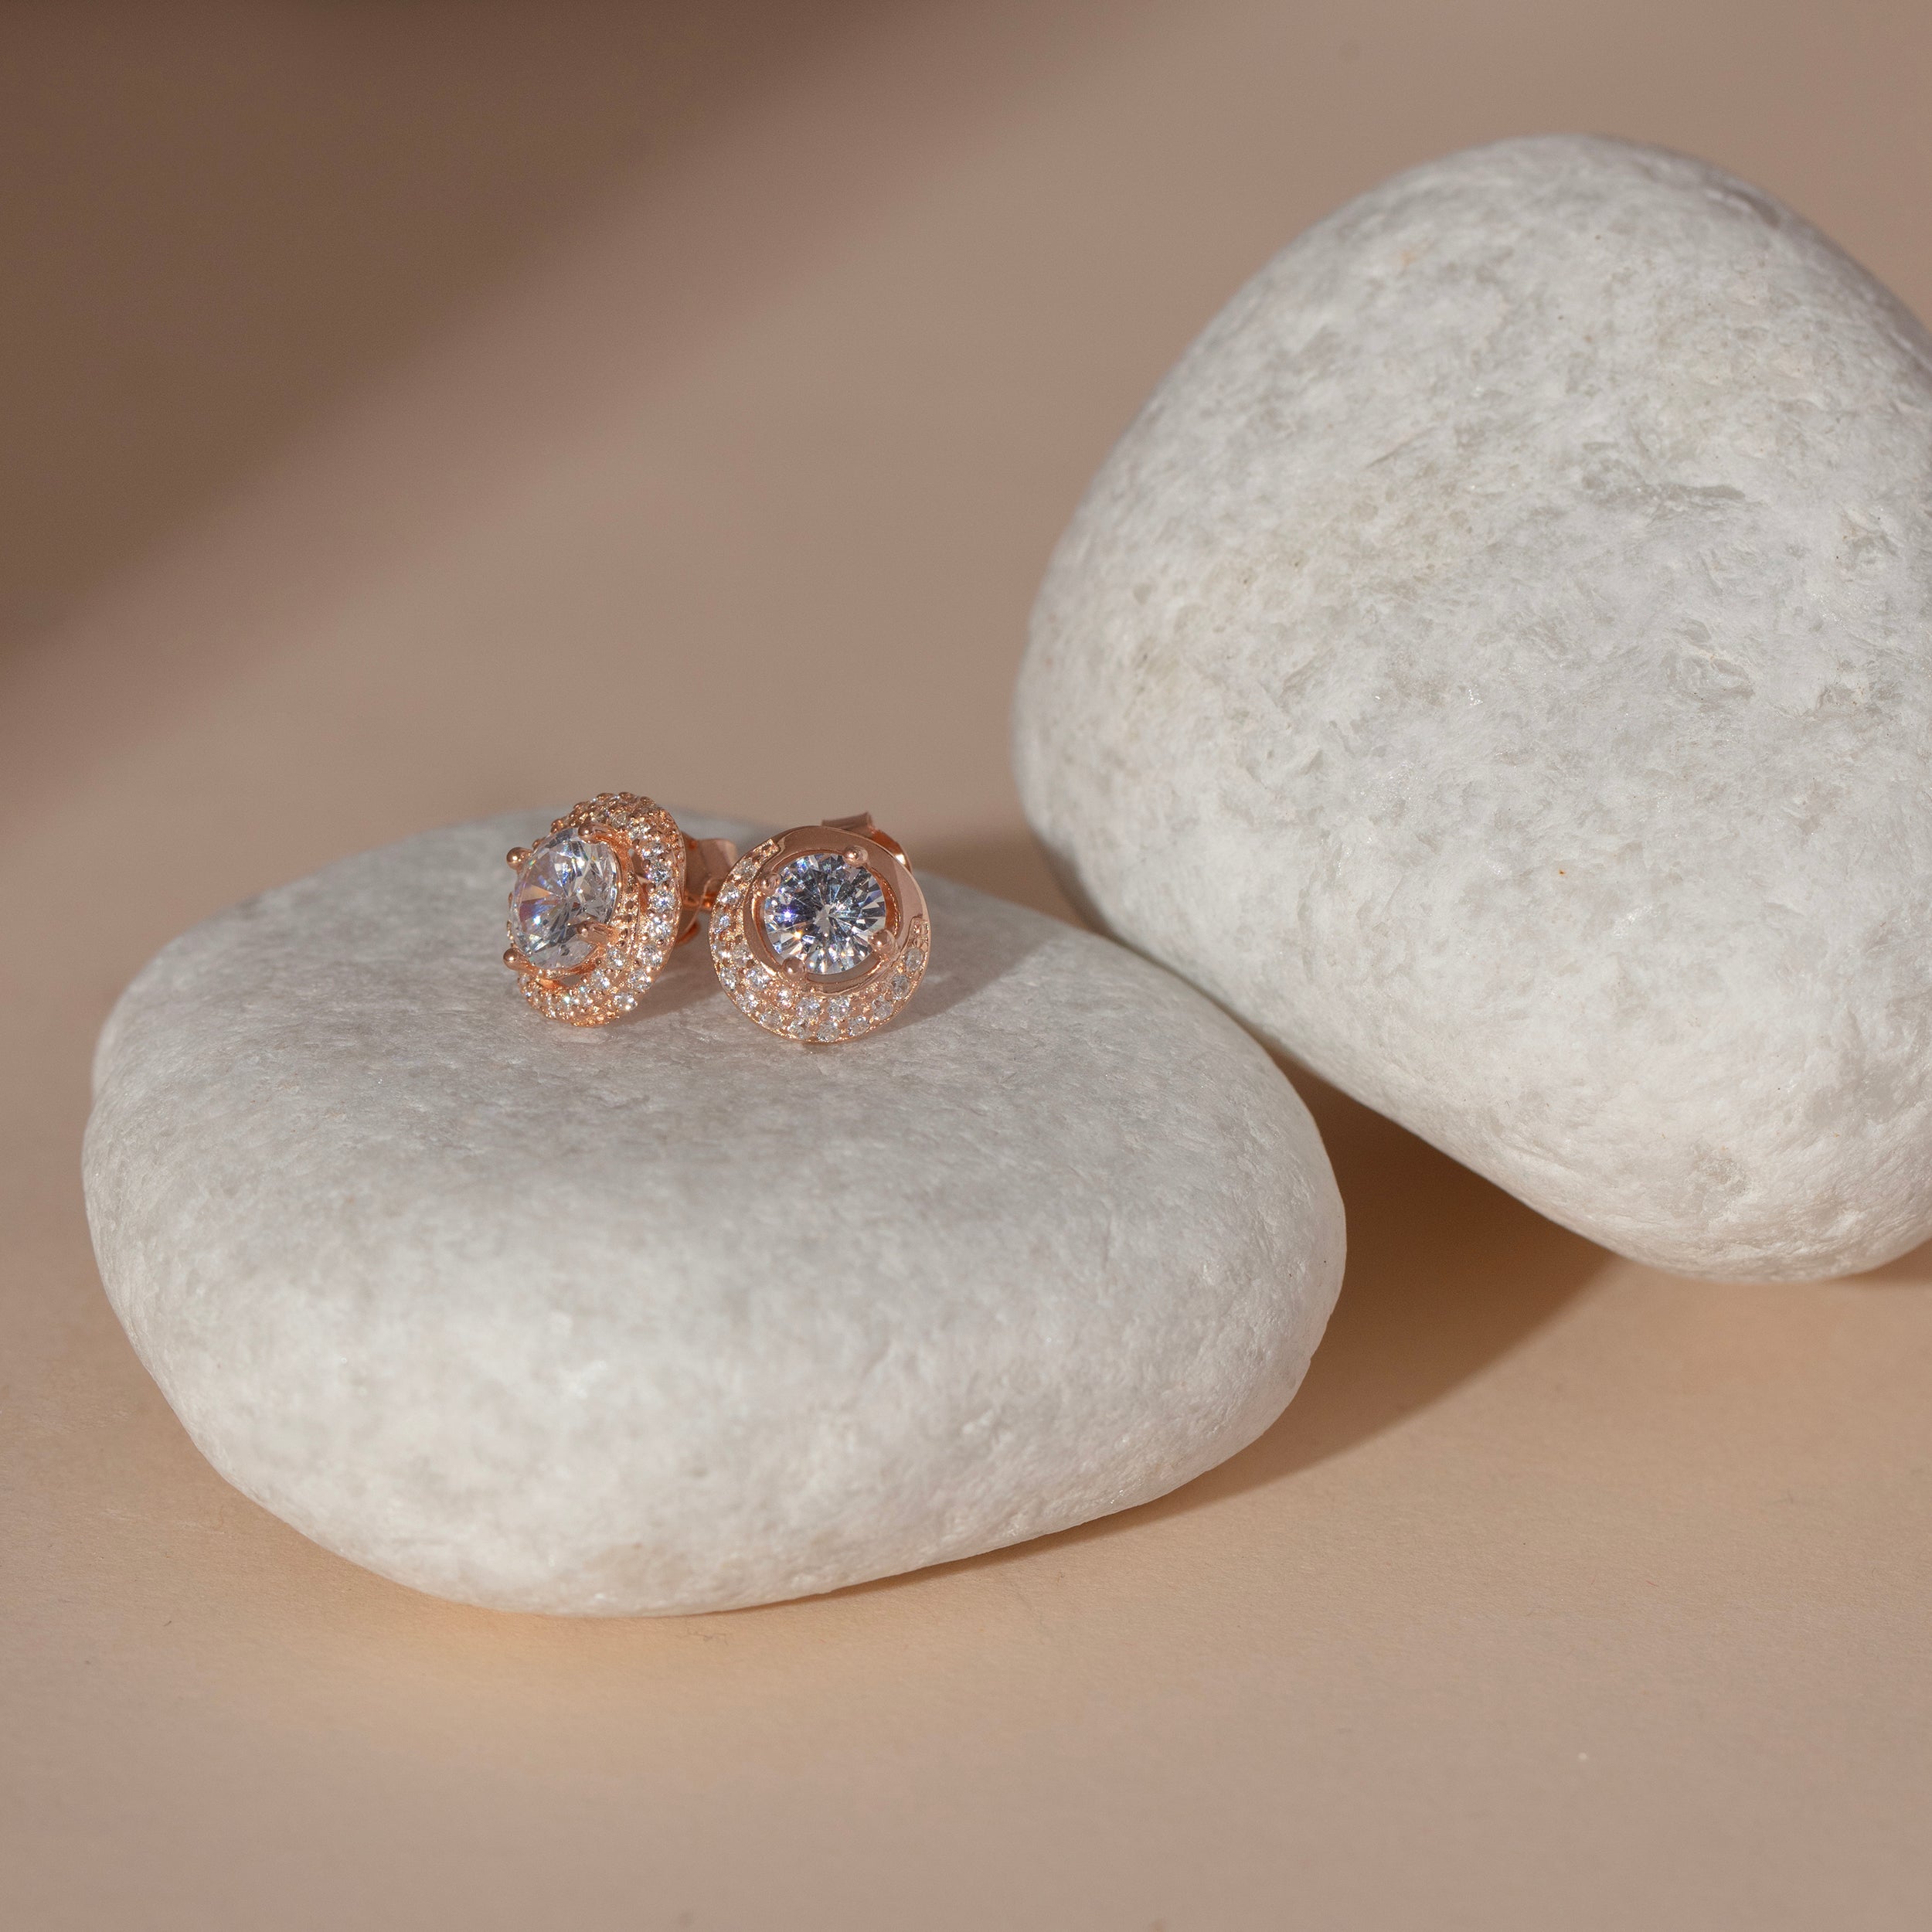 "Chic Rose Gold Studs Accents" | SKU : 0019272665, 0019272542, 0019272498, 0019272702, 0019272580, 0019037813